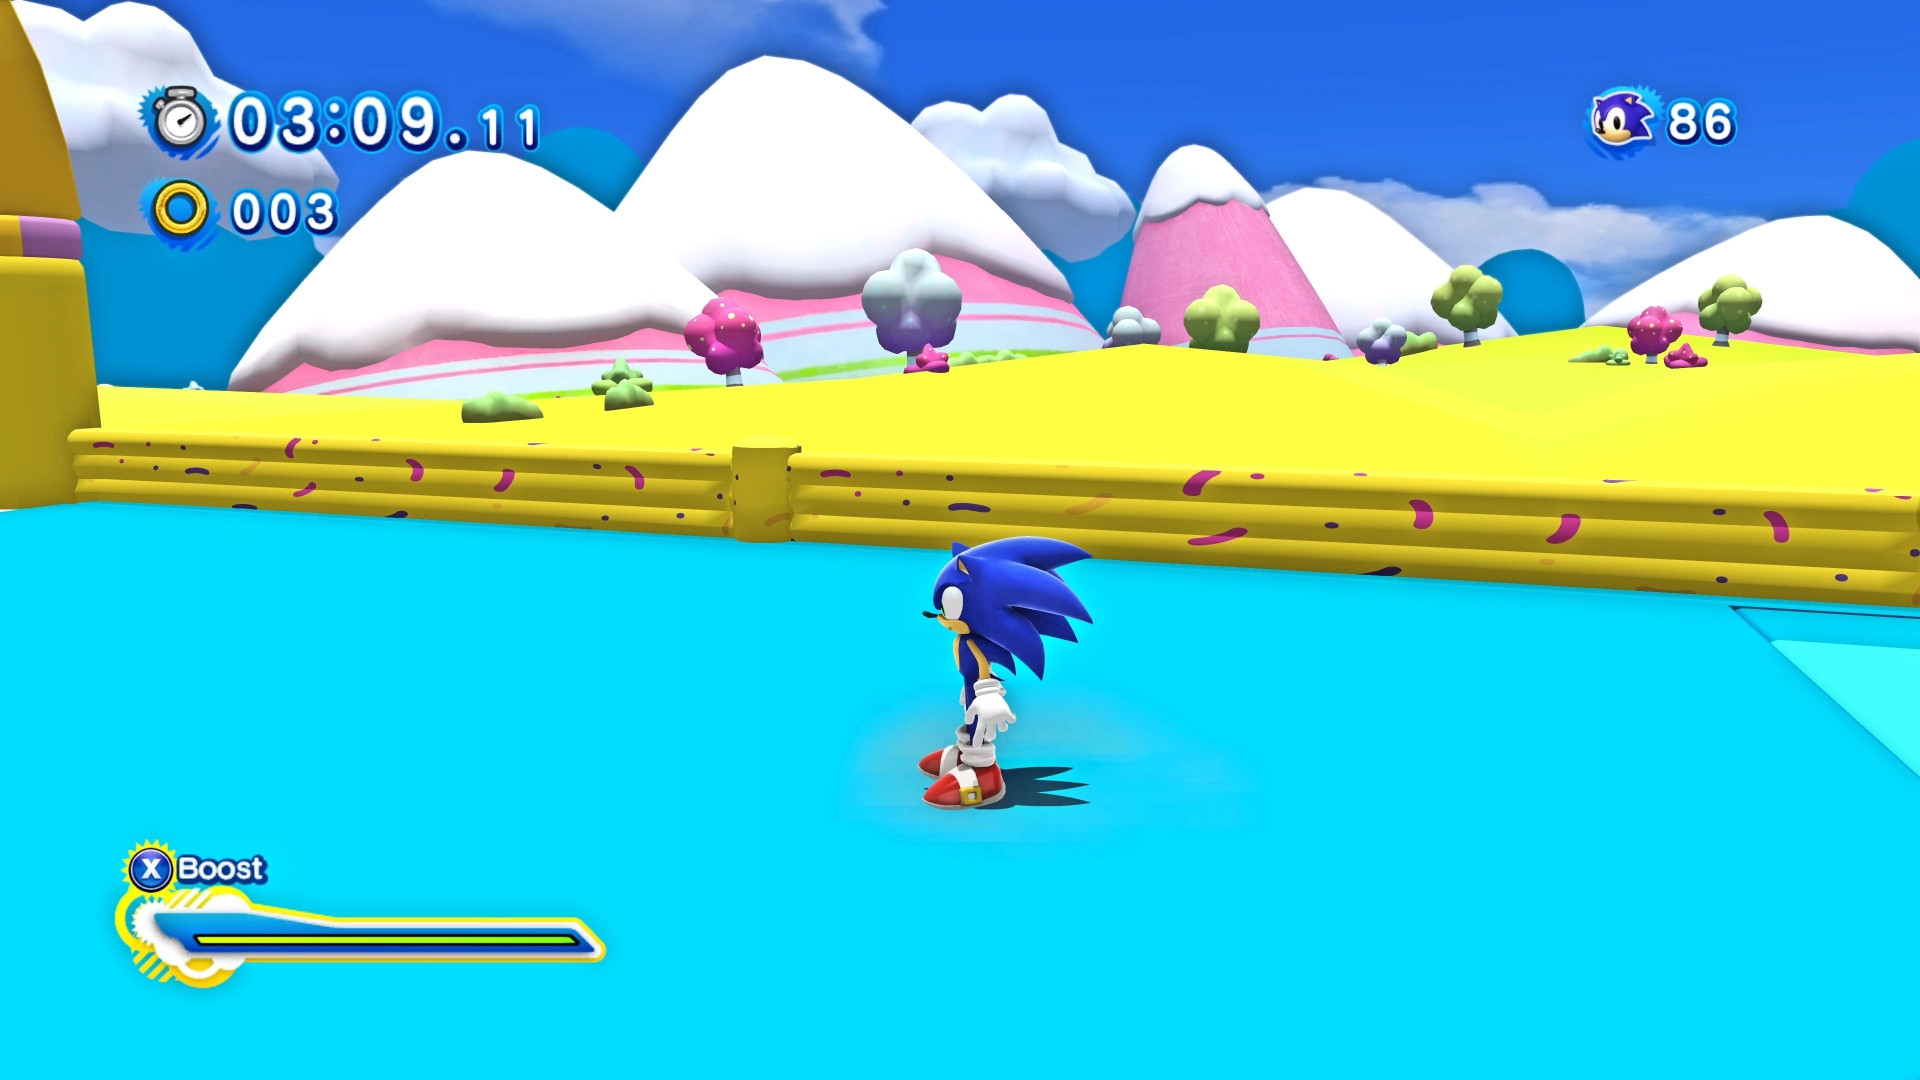 A Mod for Sonic Generations. 